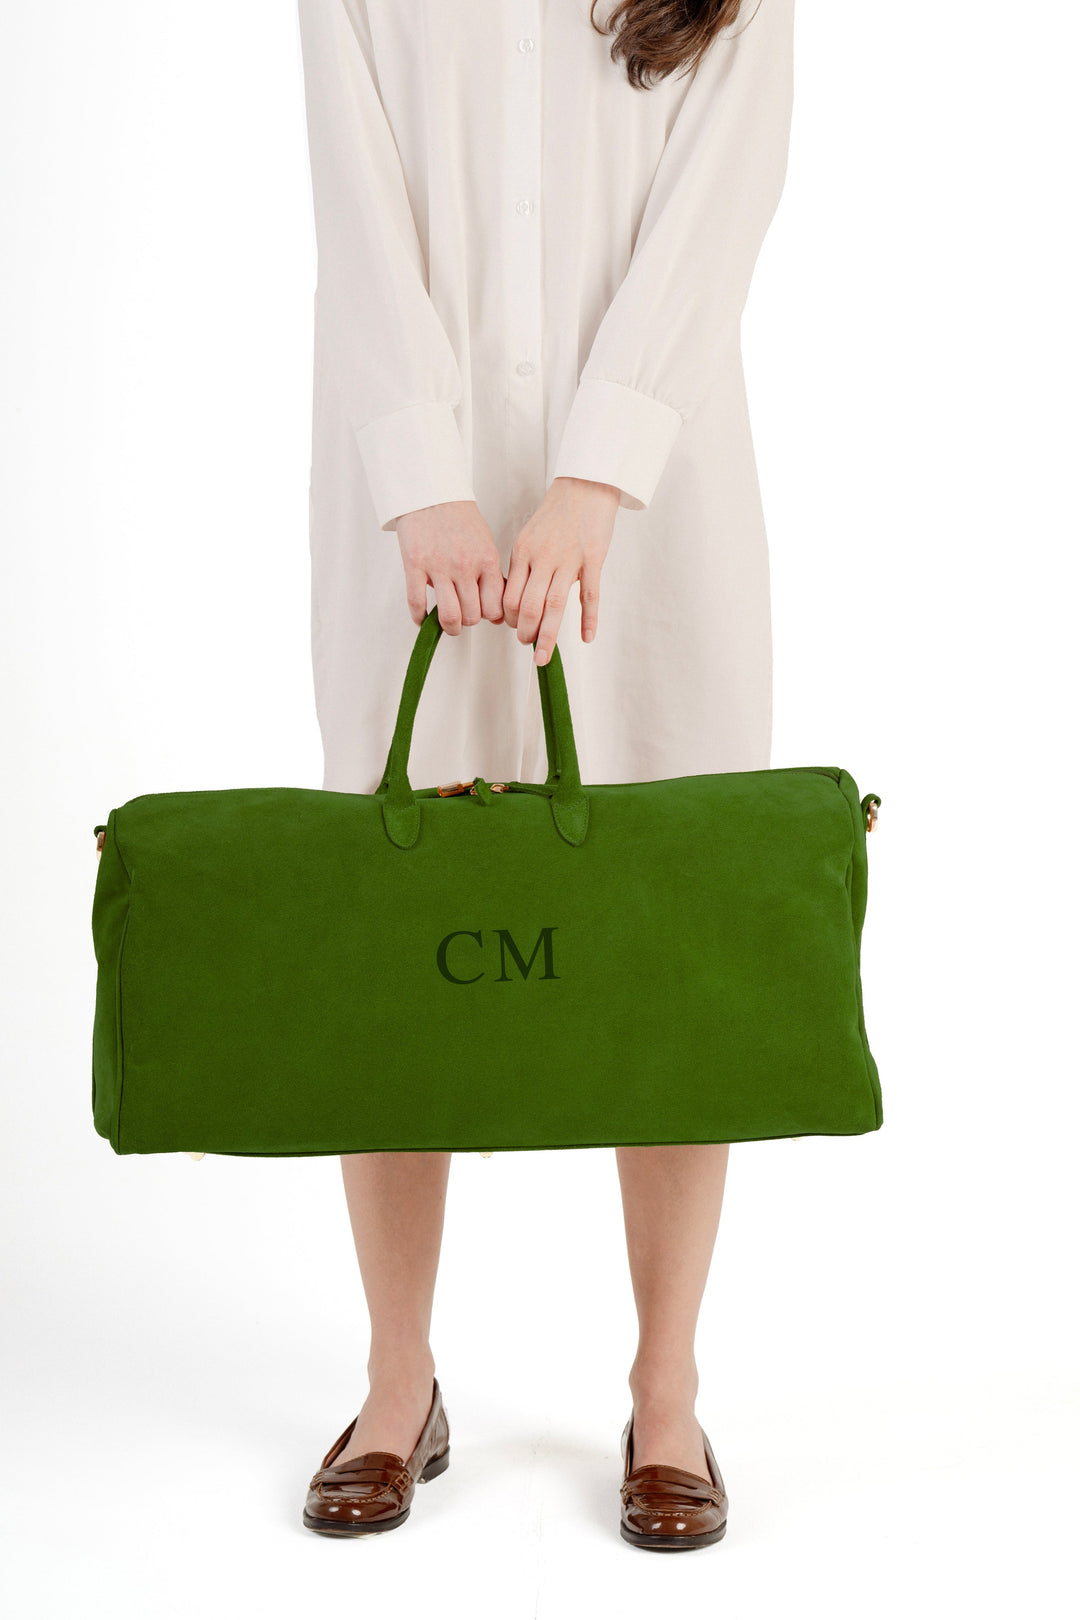 Person holding large green monogrammed travel bag